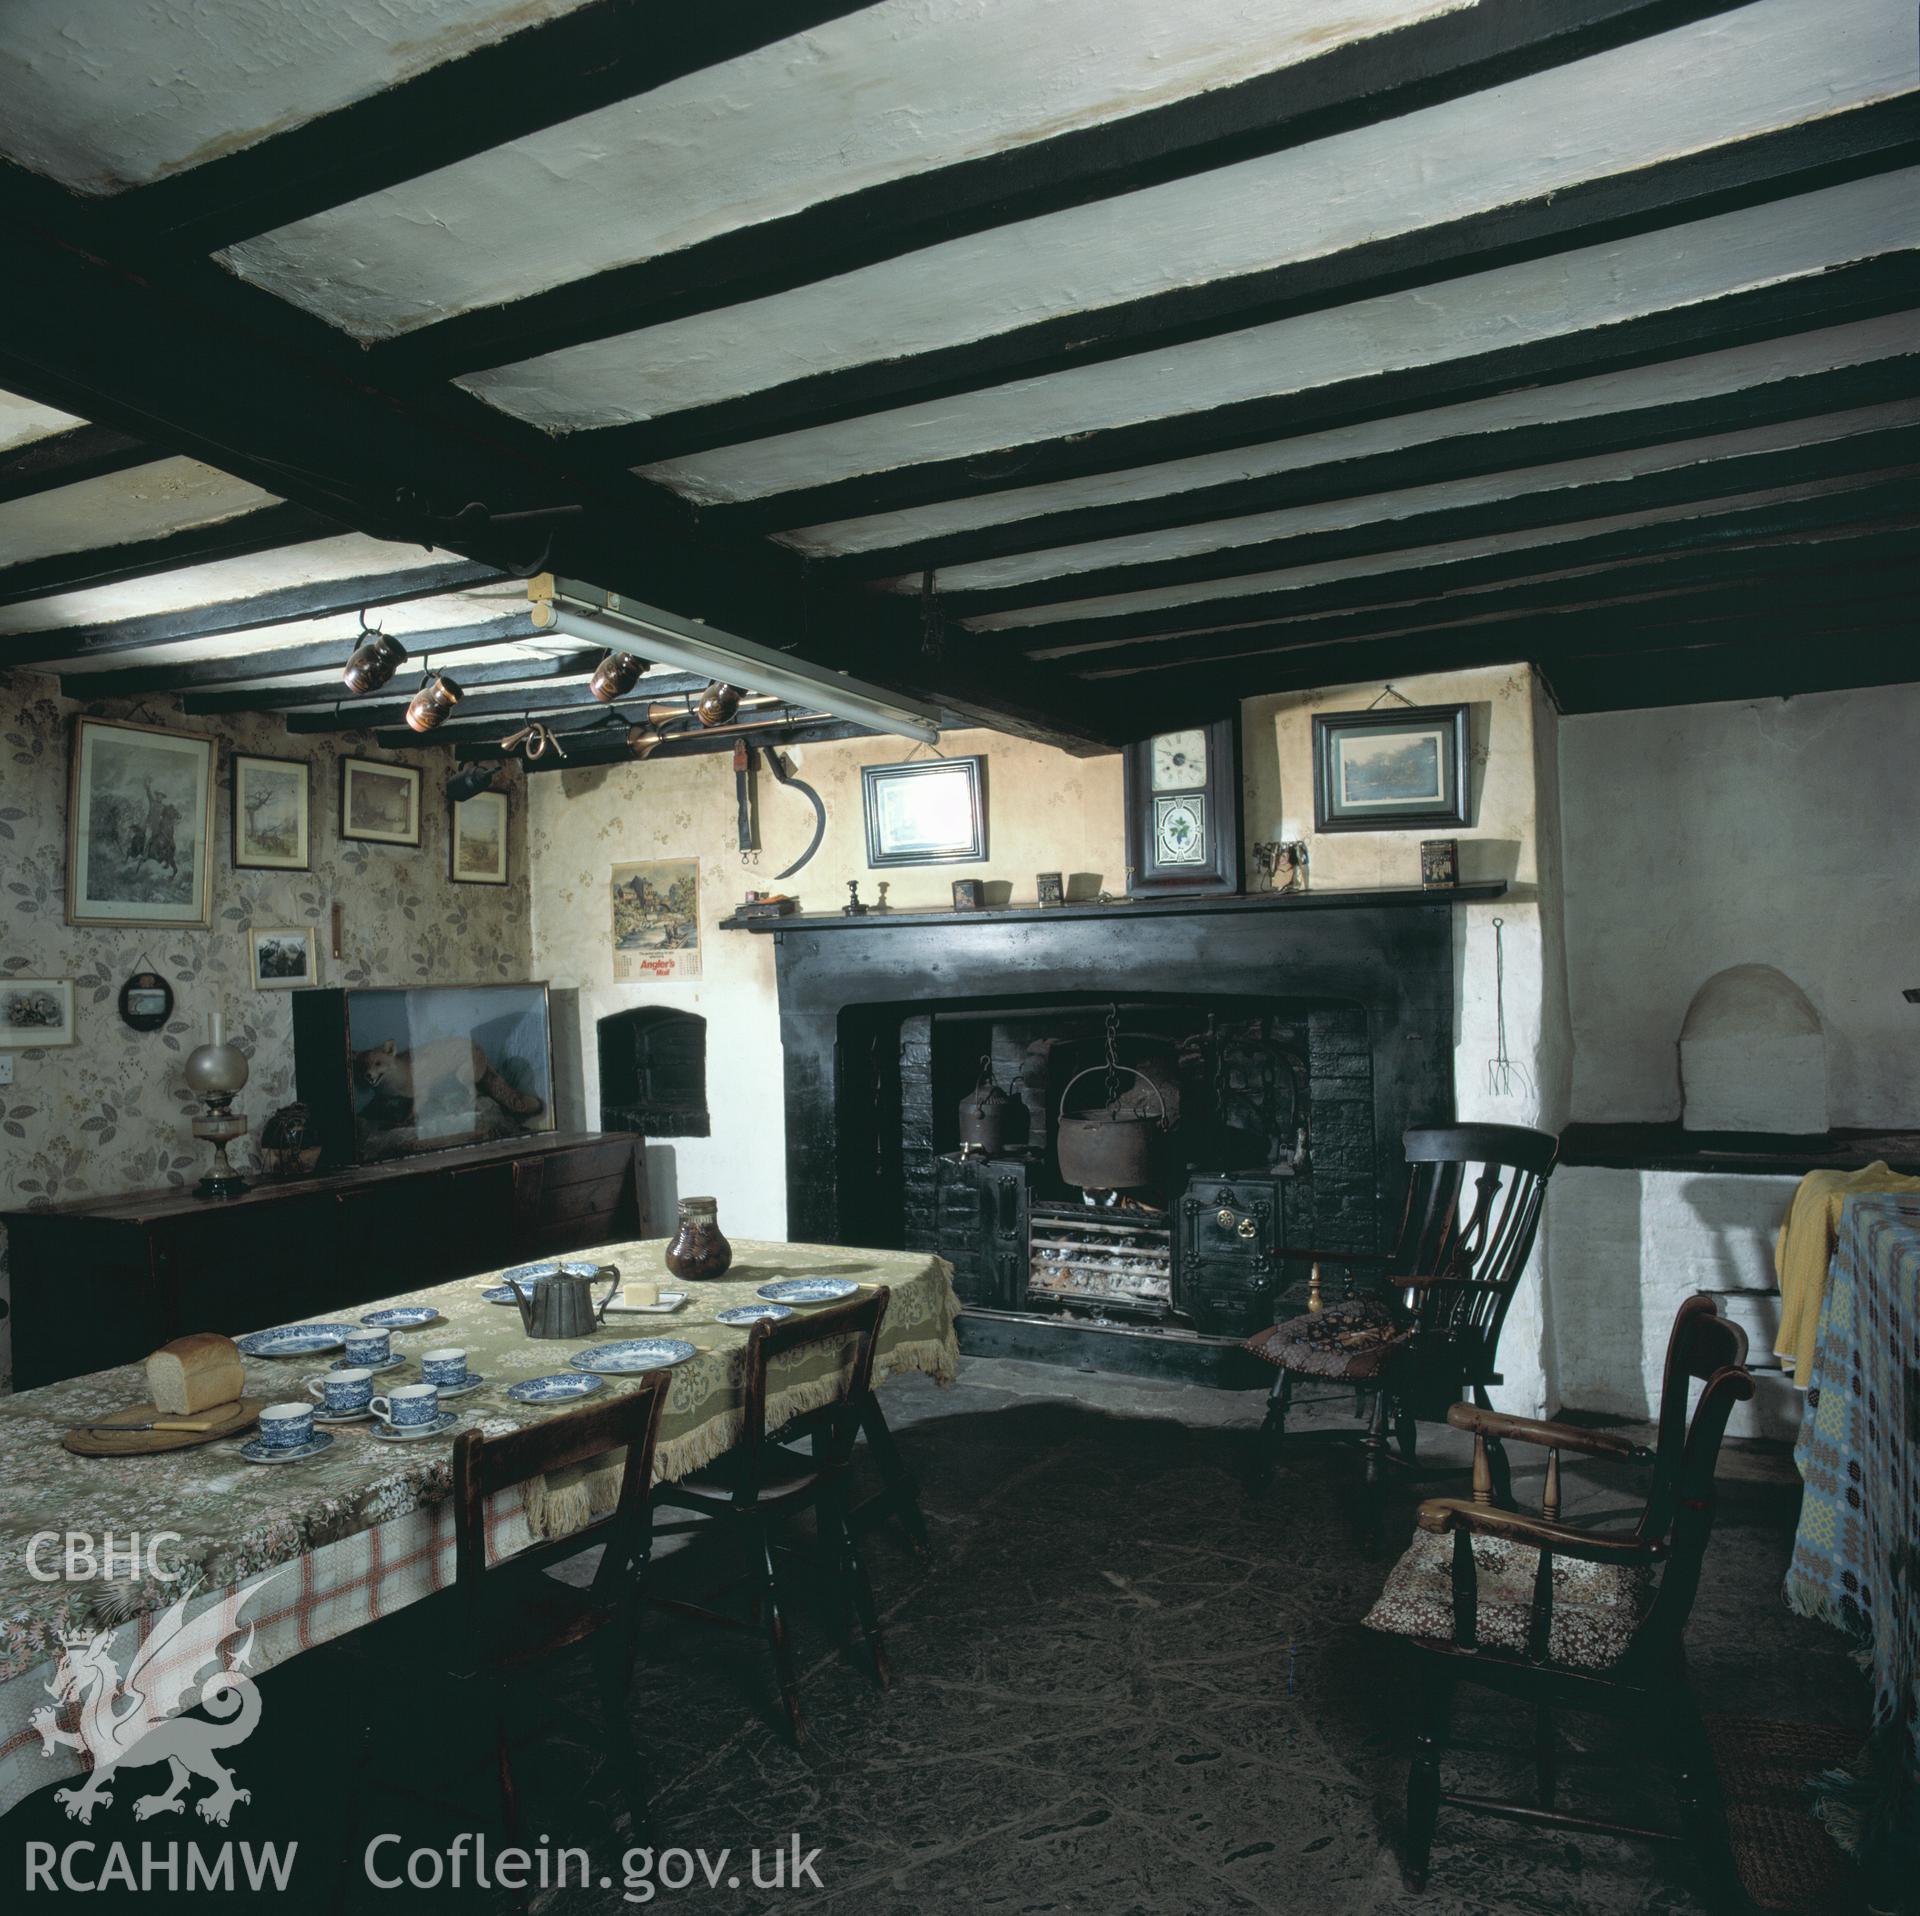 RCAHMW colour transparency showing the fireplace in the kitchen at Glan Ithon Farmhouse, taken by RCAHMW, undated.